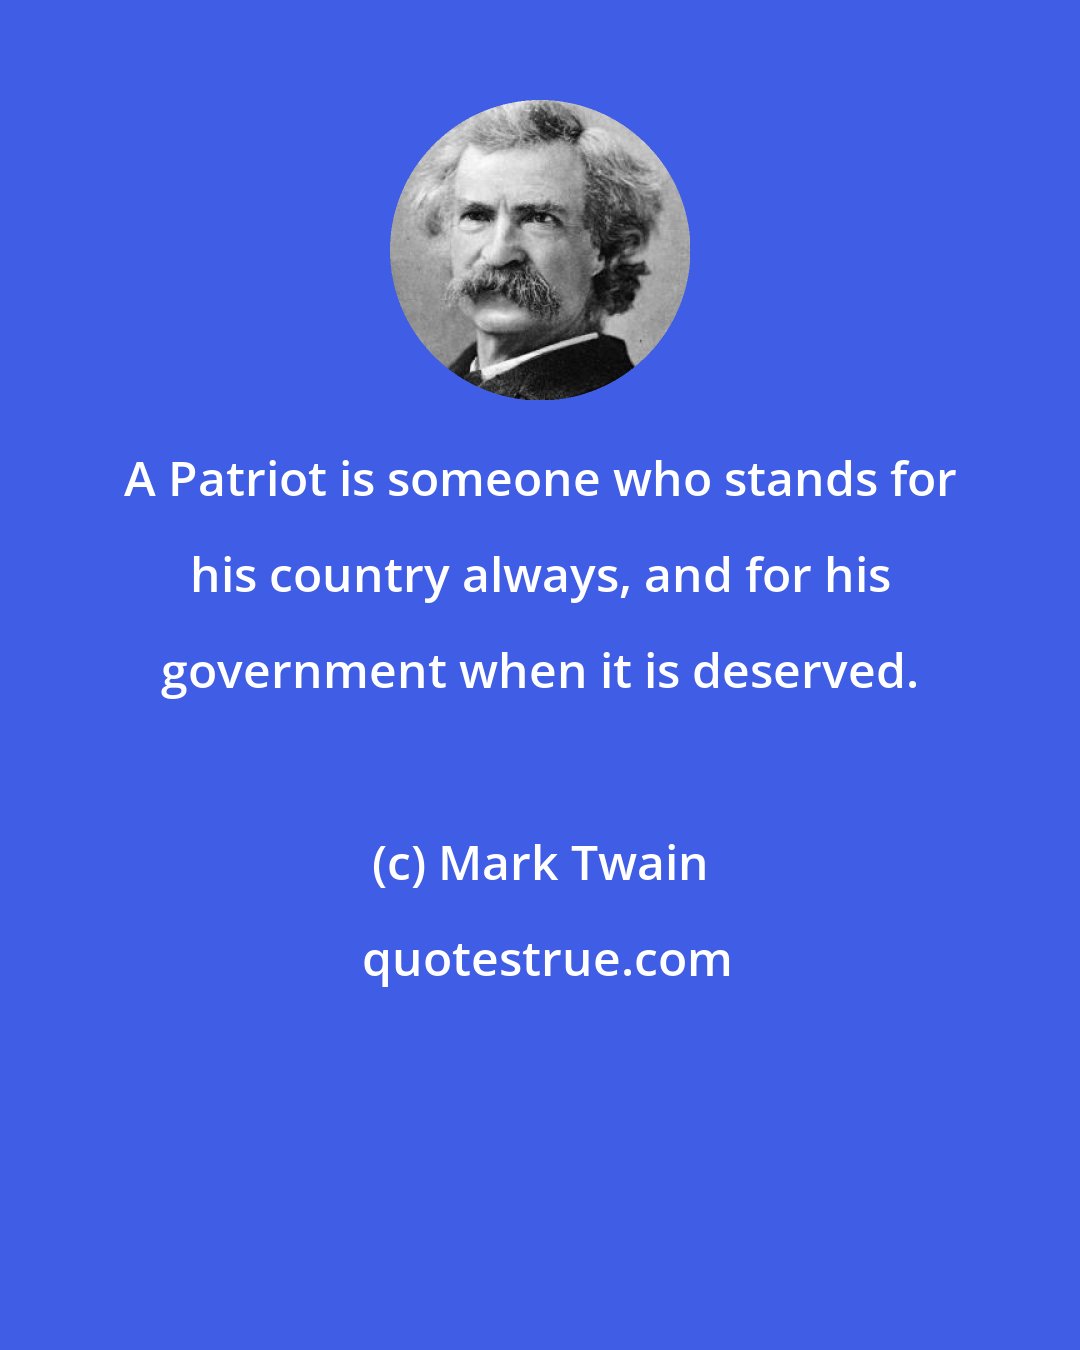 Mark Twain: A Patriot is someone who stands for his country always, and for his government when it is deserved.